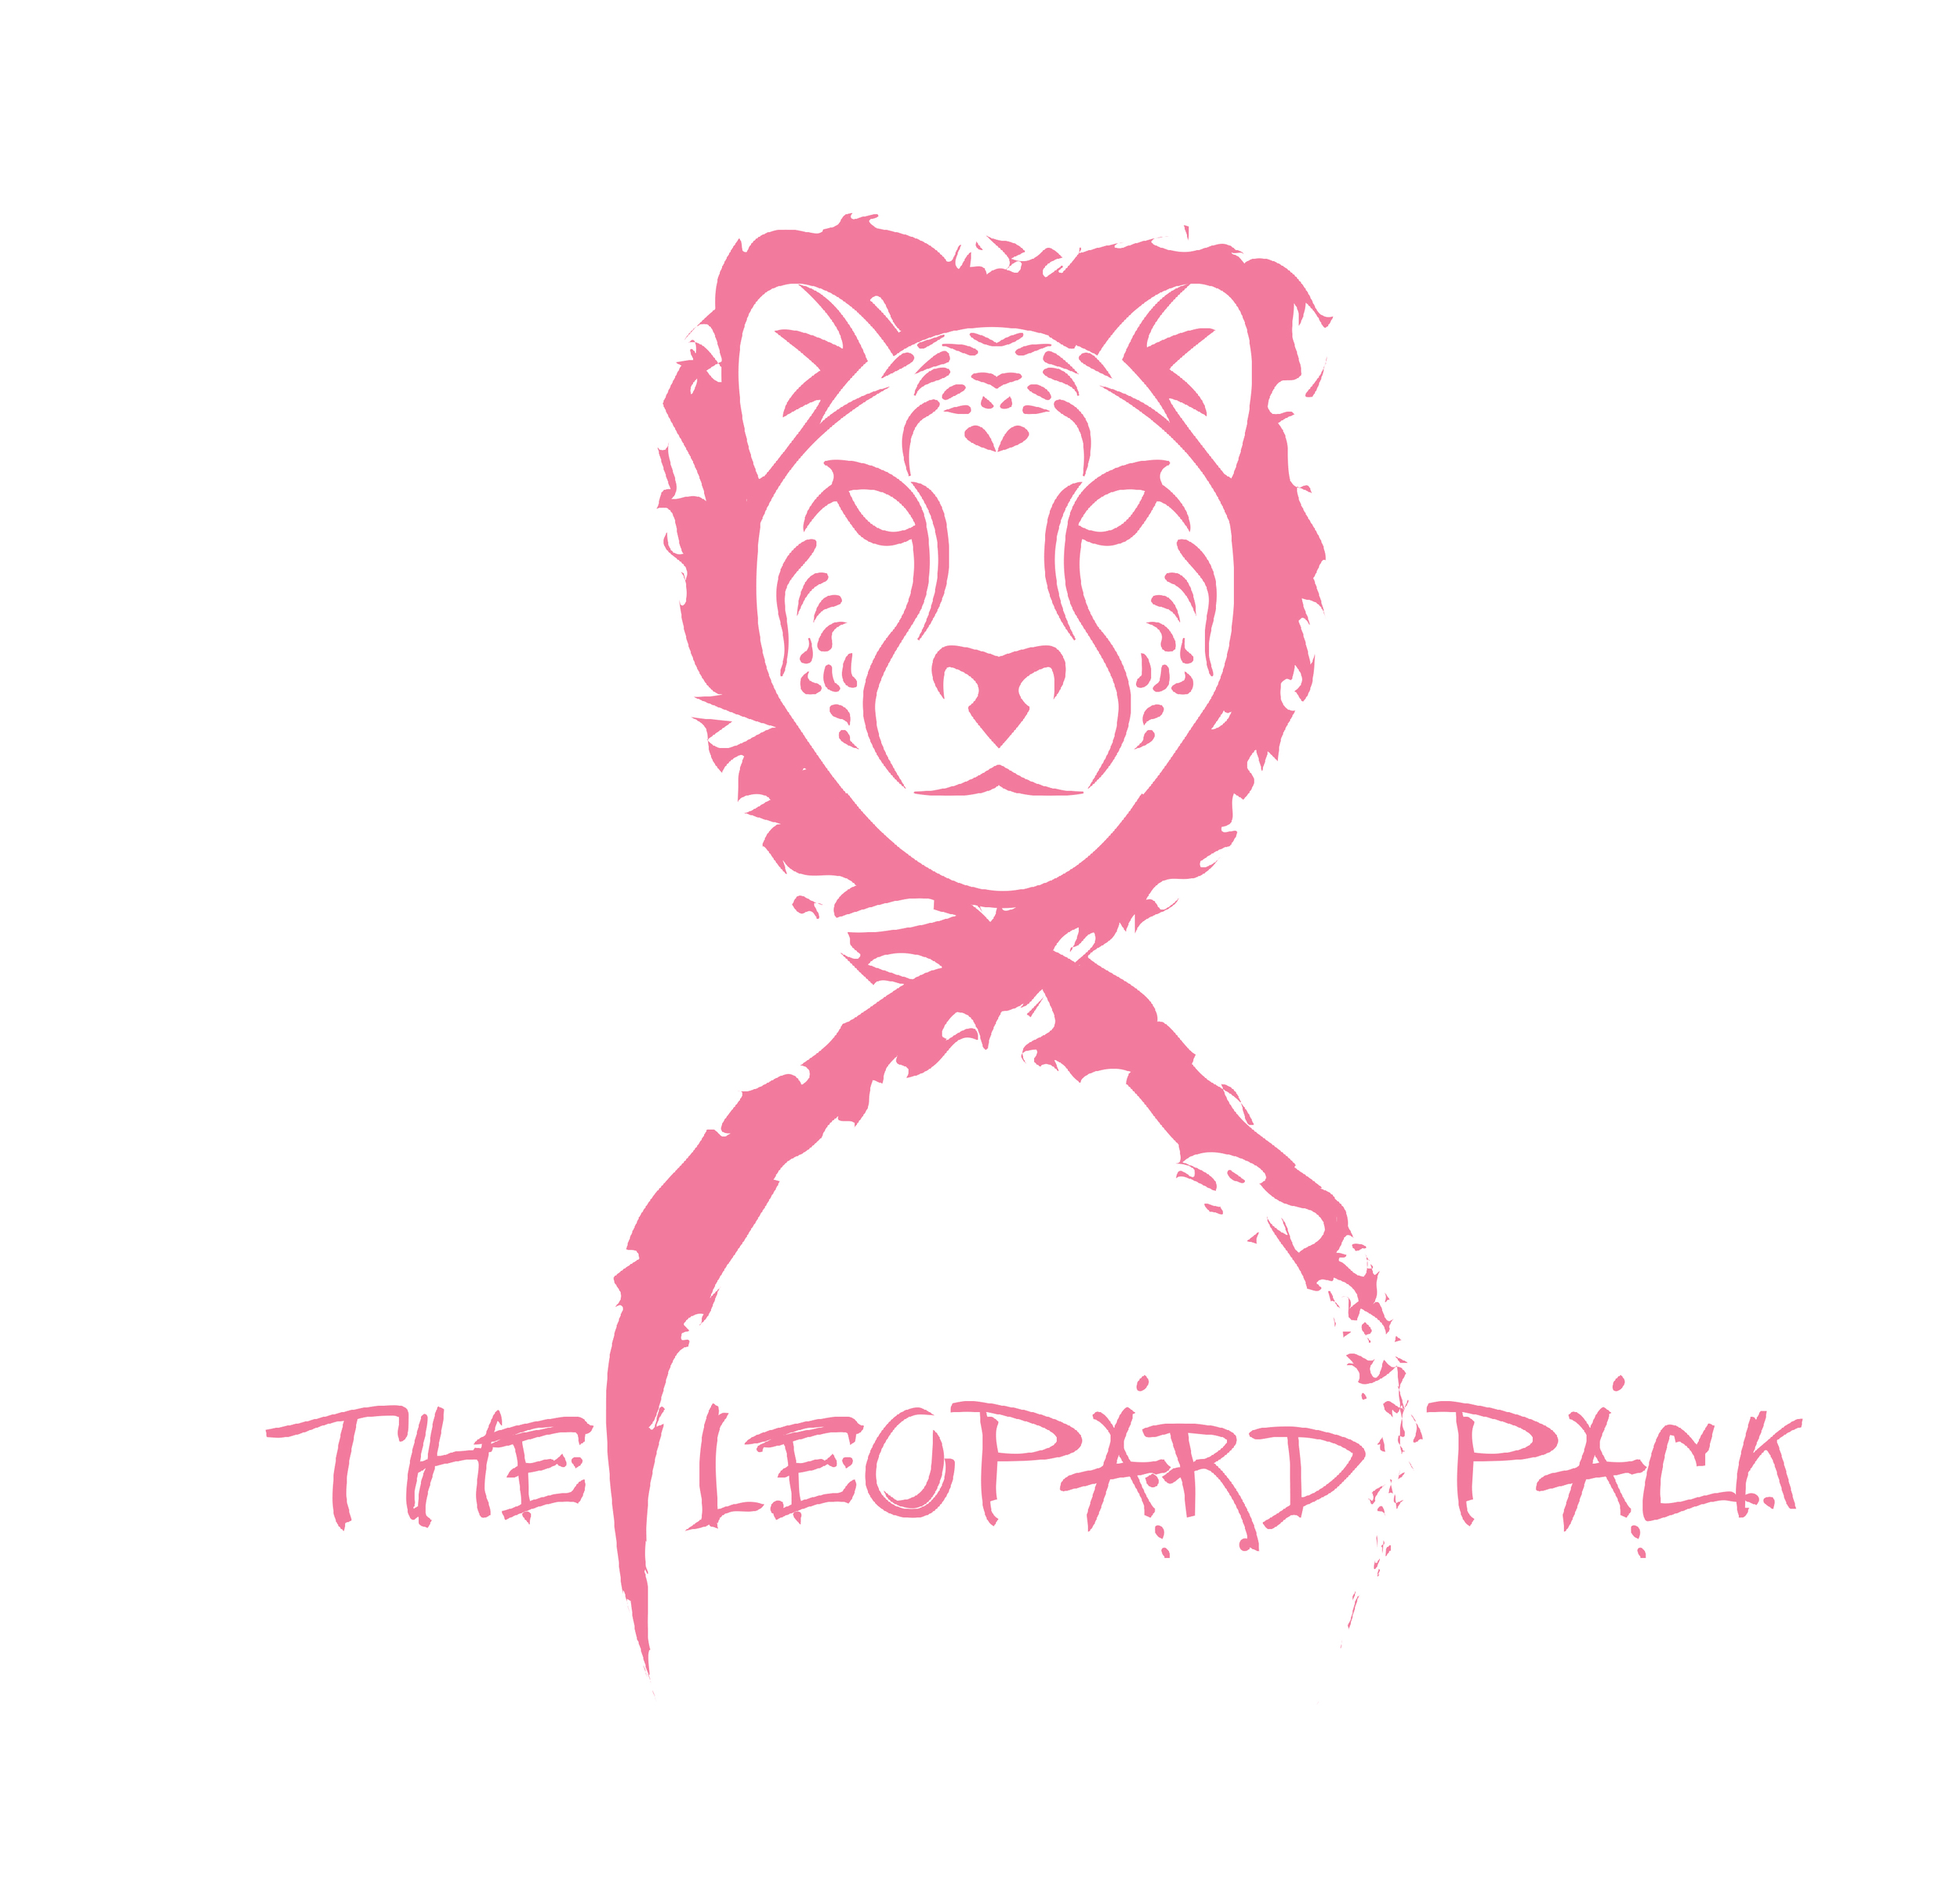 THE LEOPARD PACK